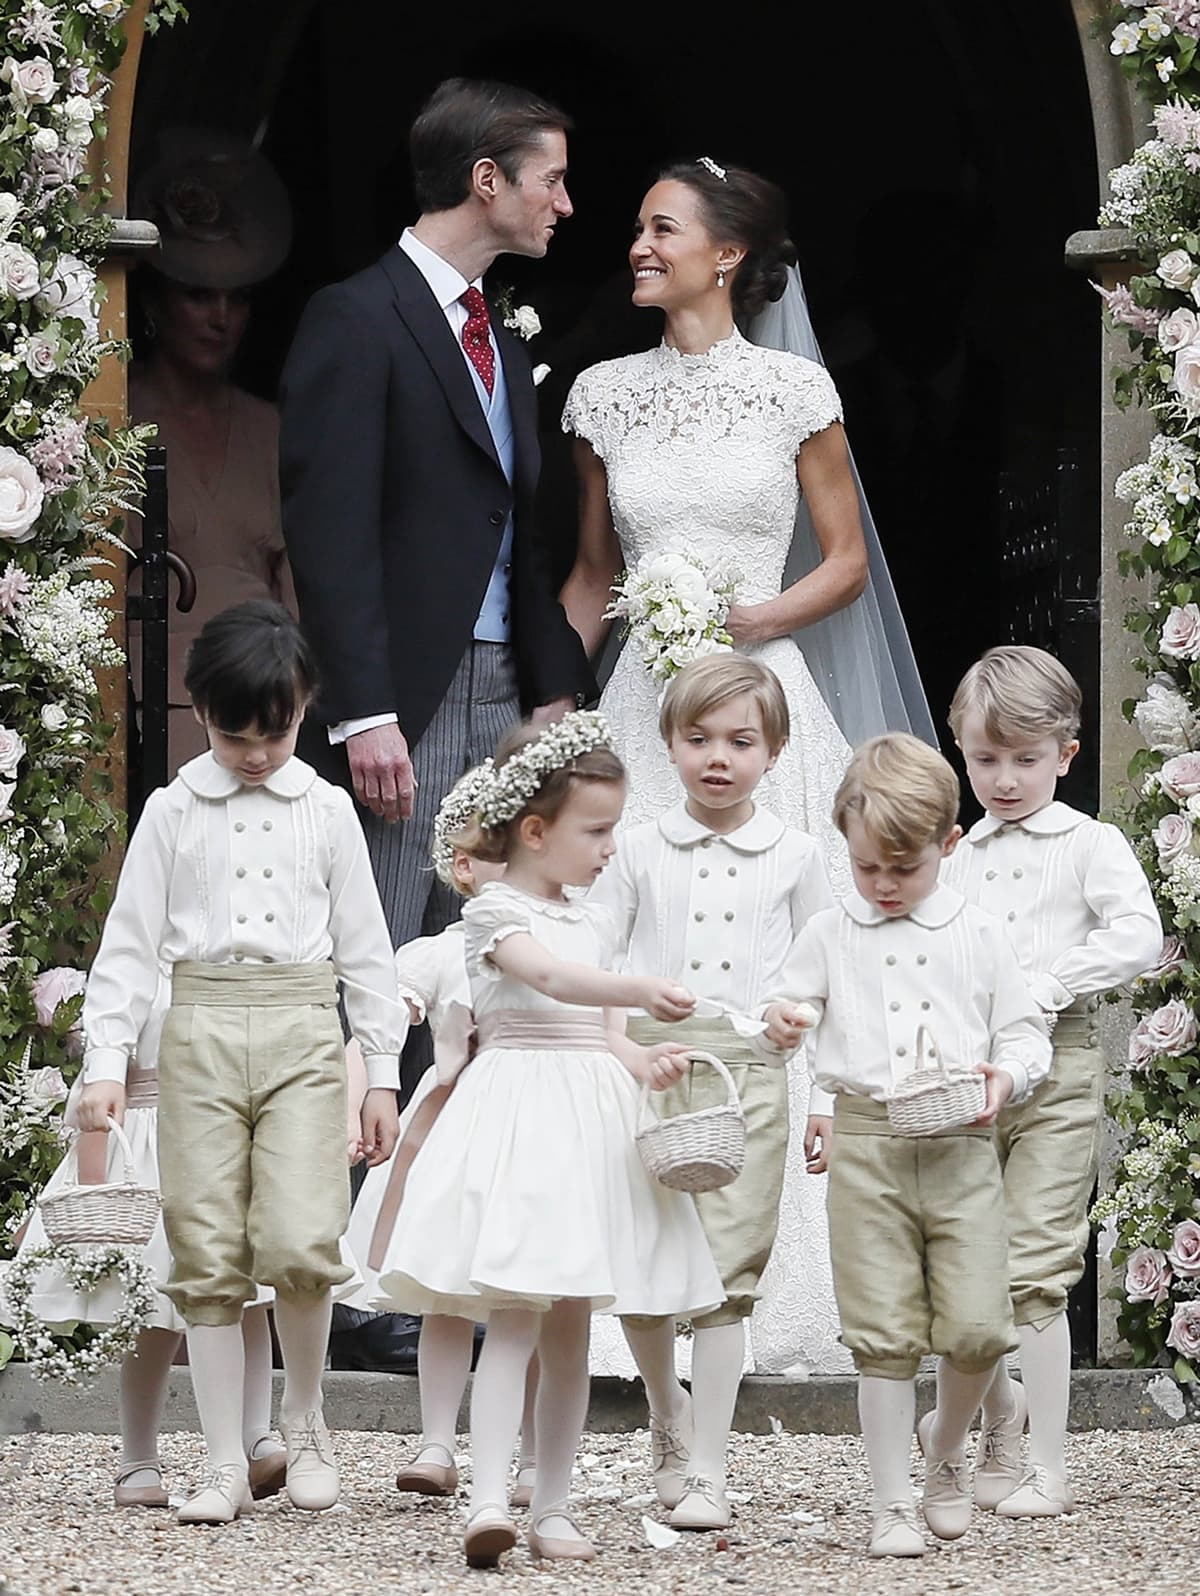 James Matthews and Pippa Middleton outside St Mark's Church after their wedding